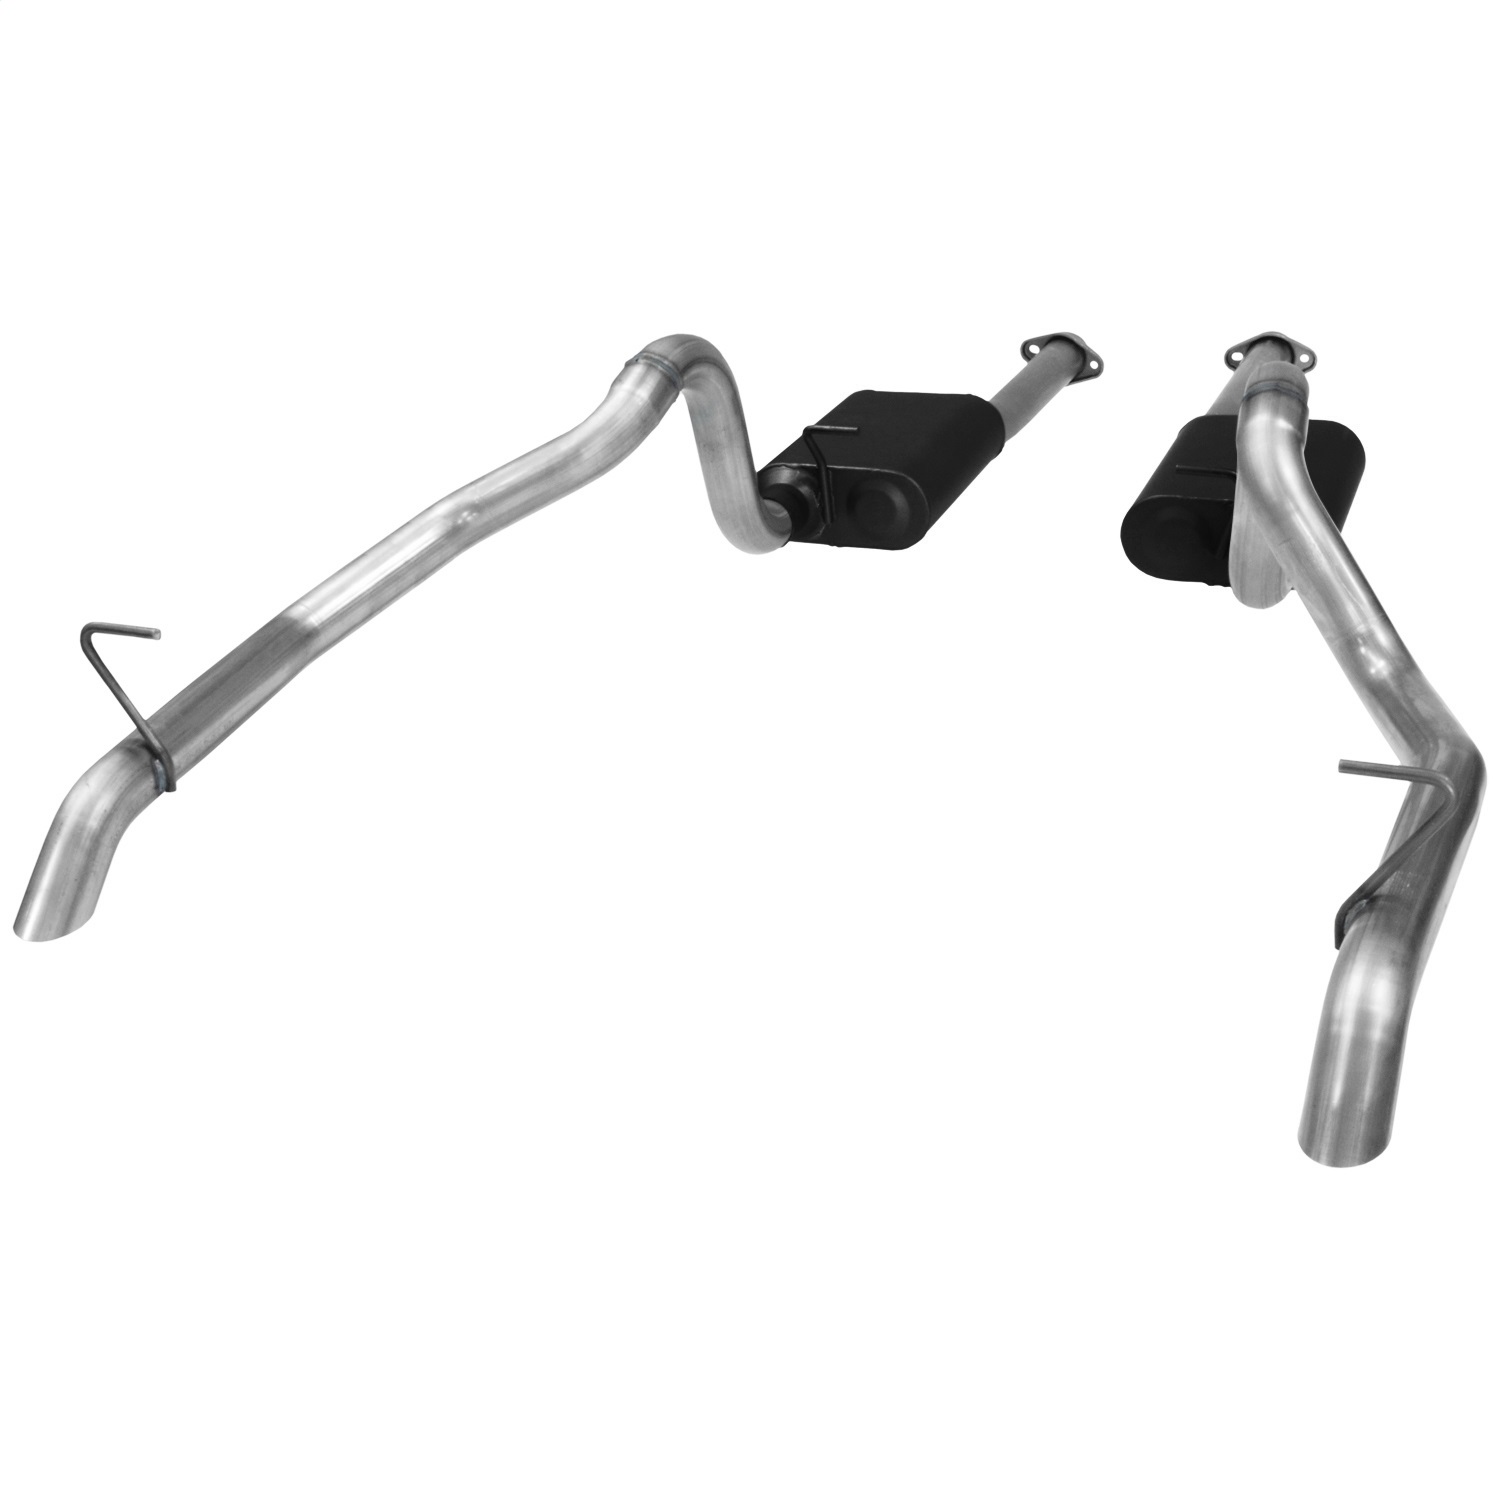 Flowmaster Flowmaster 817116 American Thunder Cat Back Exhaust System Fits 87-93 Mustang